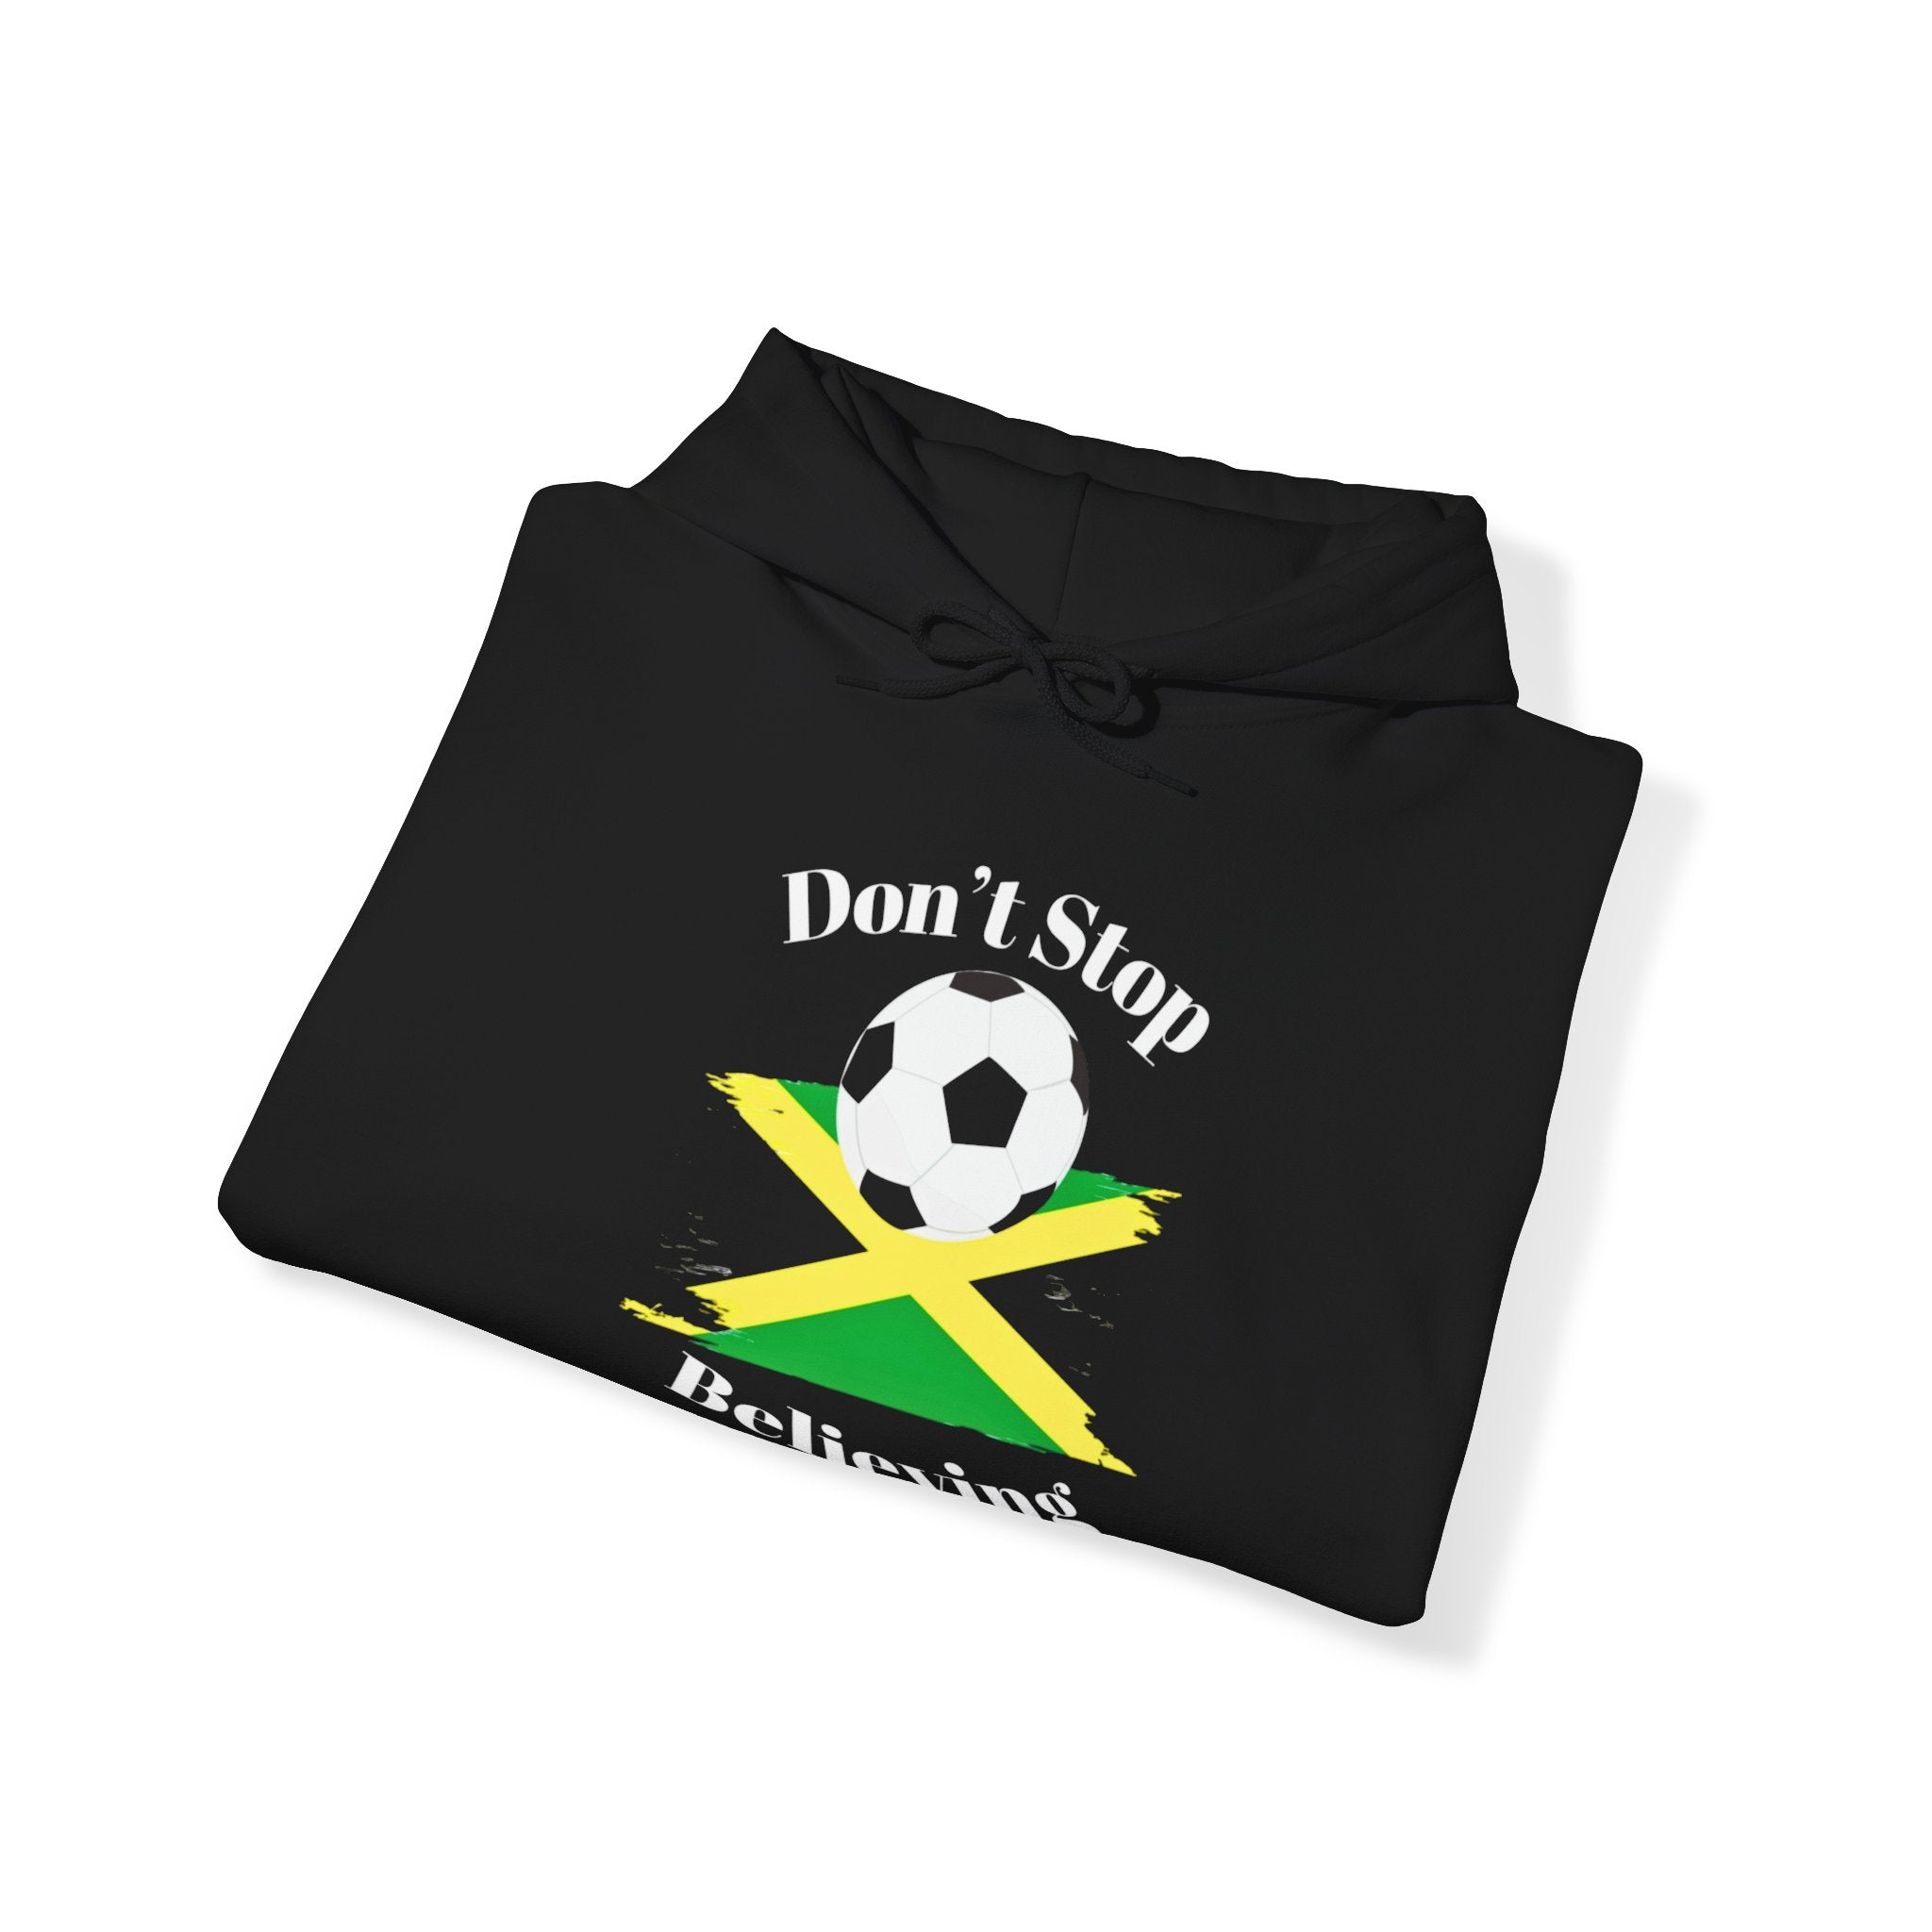 Jamaica "Don't Stop Believing 2026"  Hooded Sweatshirt - Road to World Cup